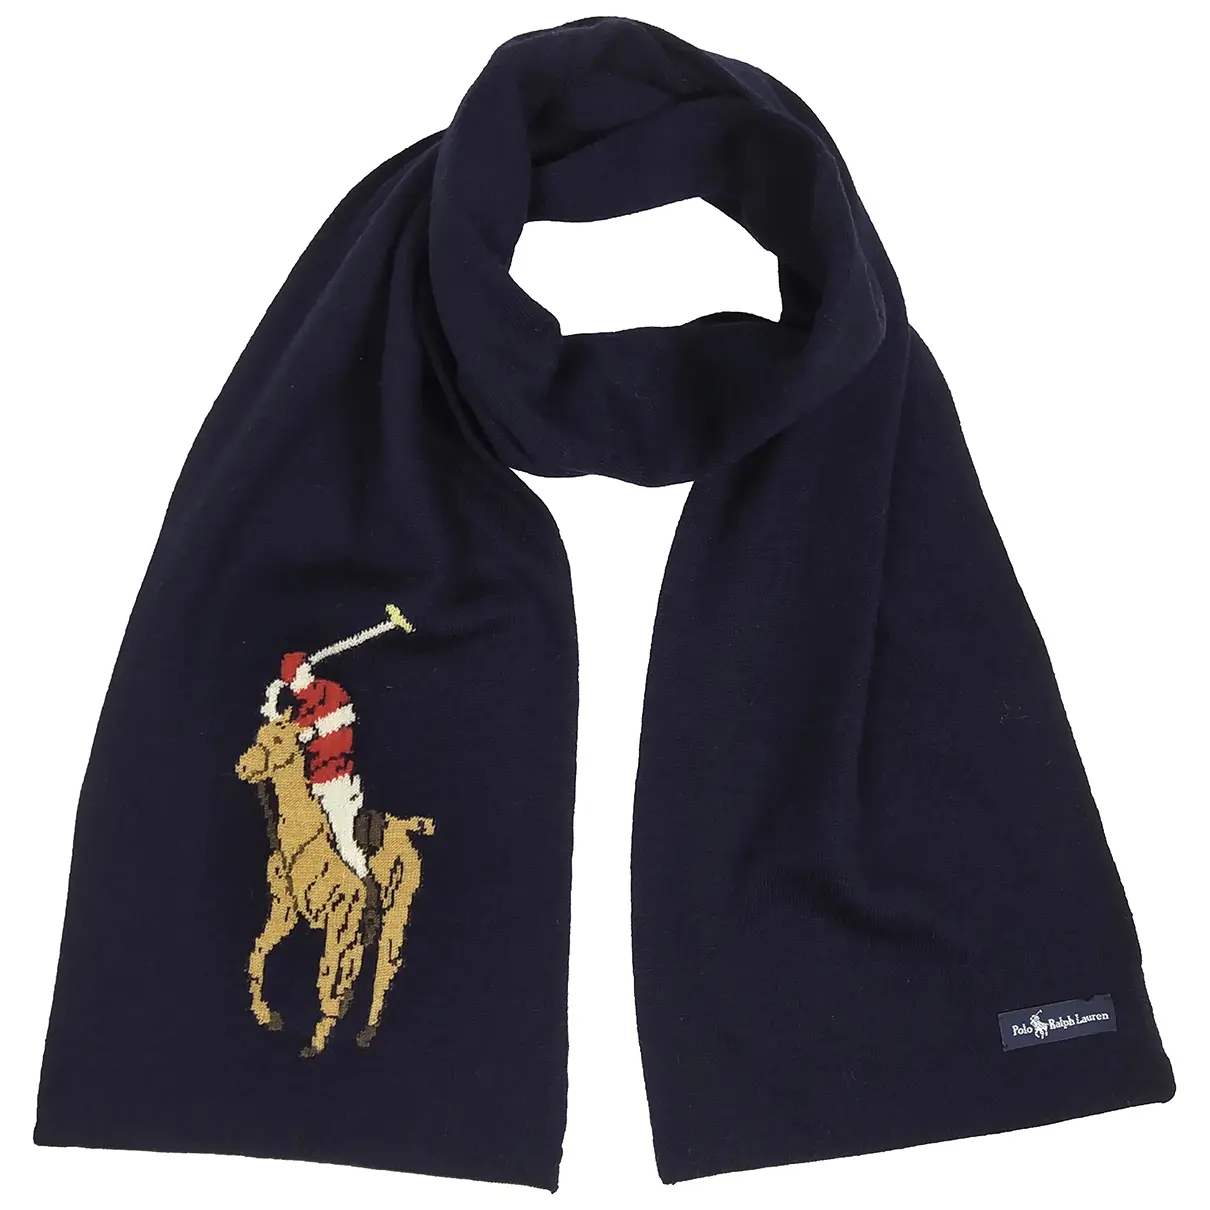 Wool scarf & pocket square Polo Ralph Lauren